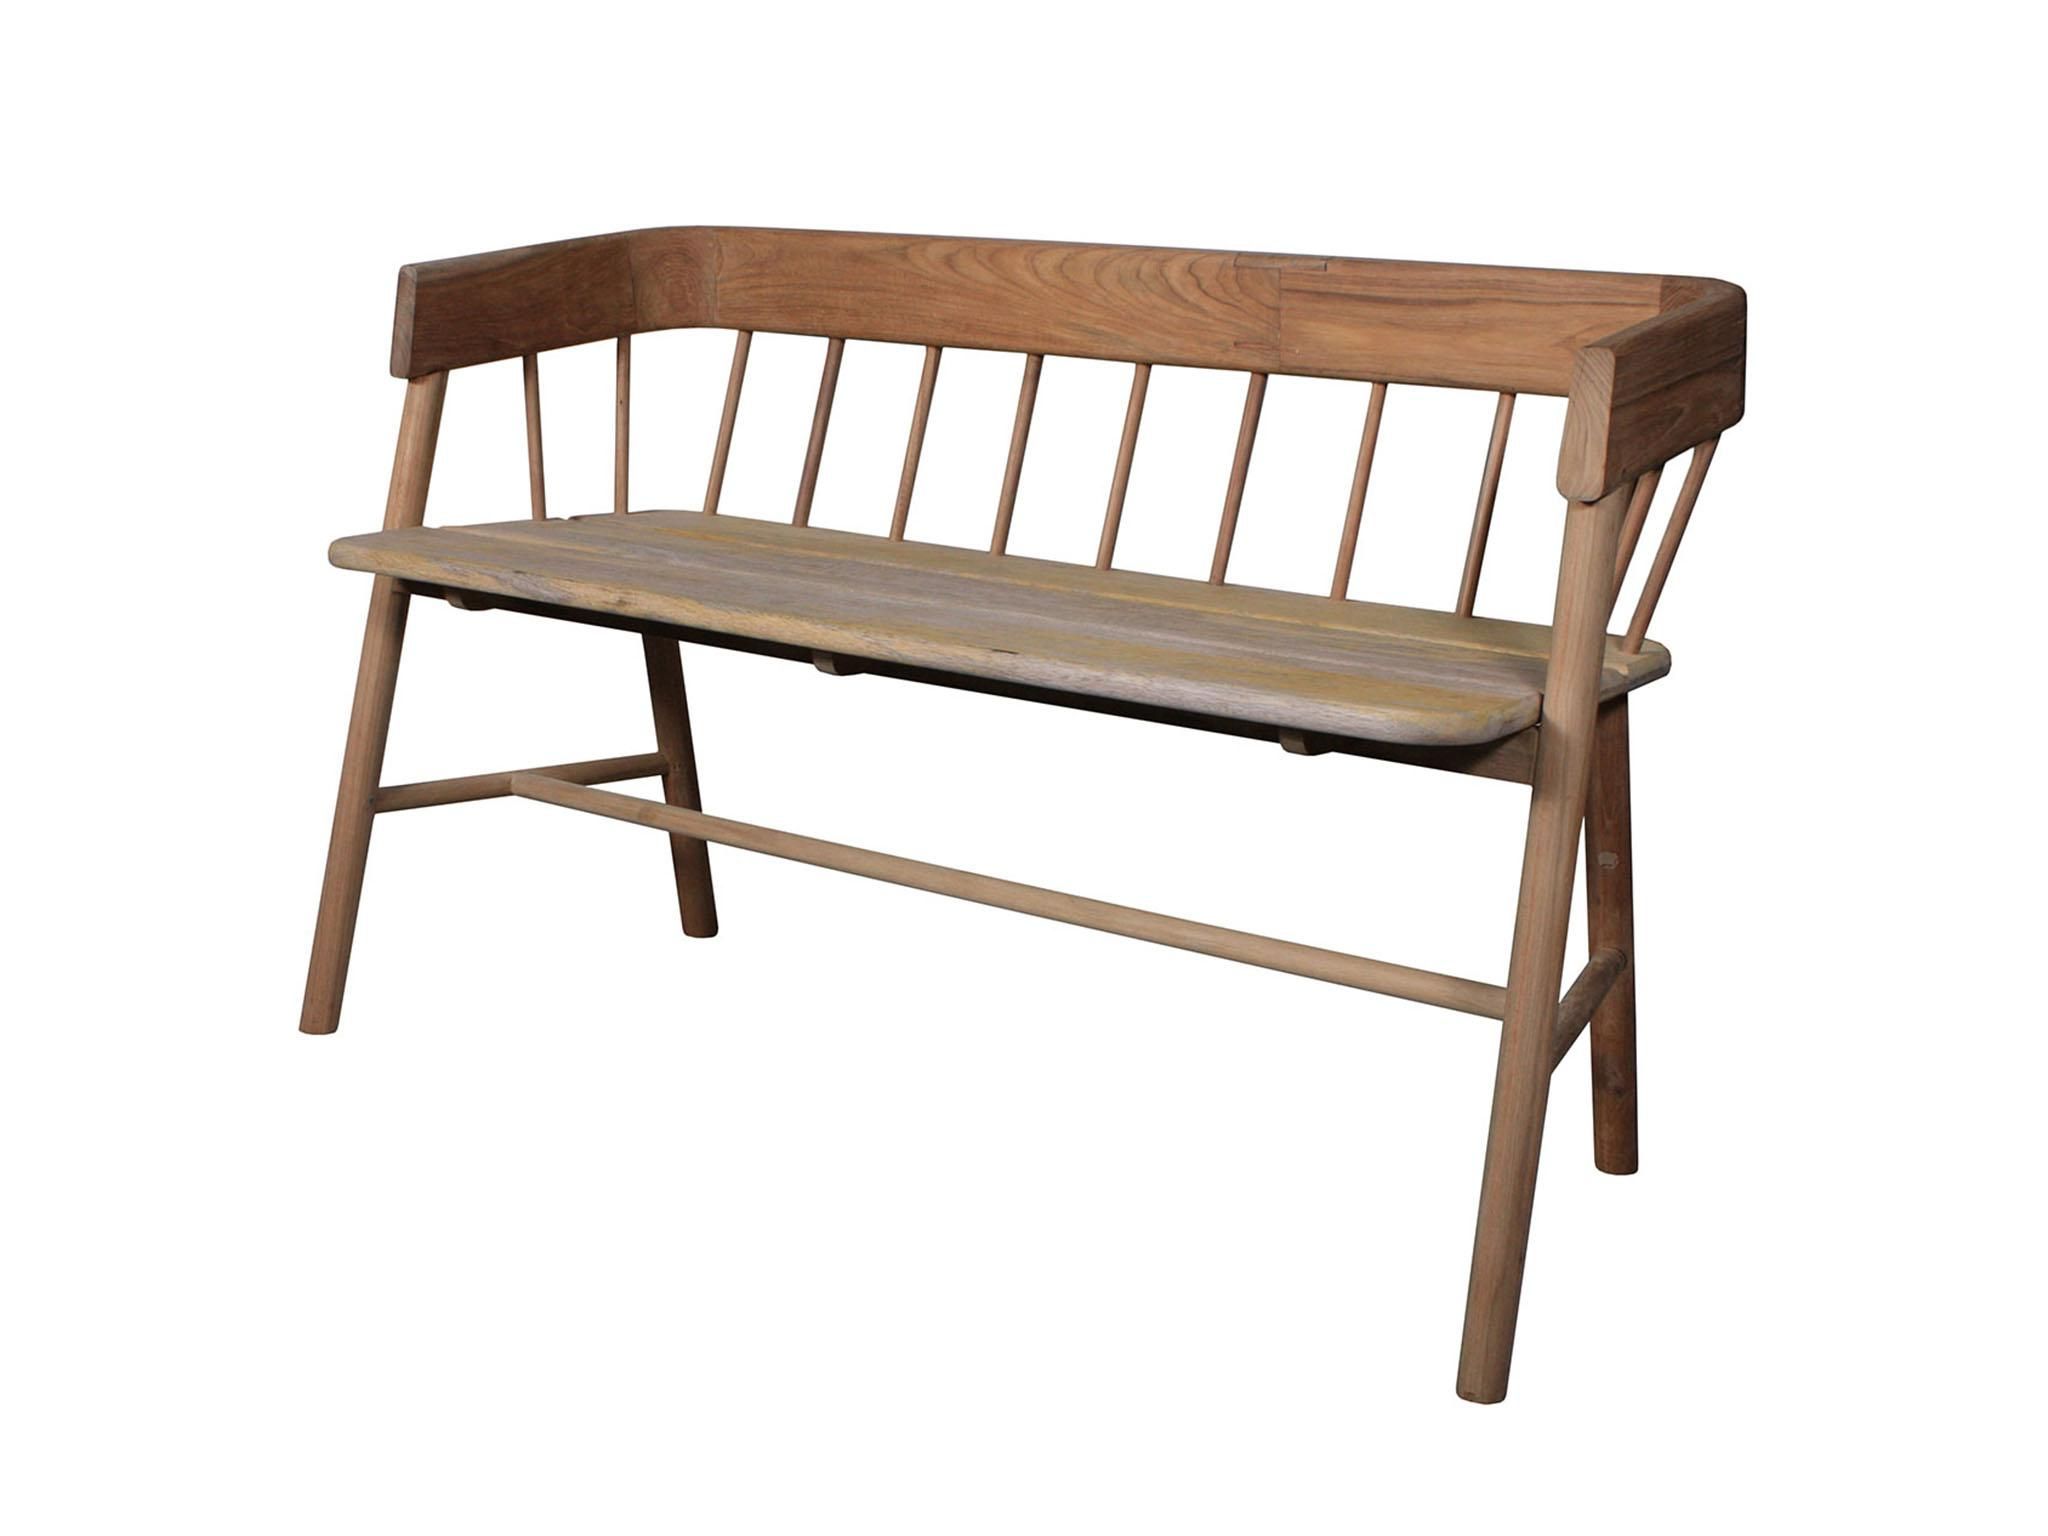 Best Garden Furniture: From Rattan Dining Sets To Hanging Chairs For Widely Used Traditional English Glider Benches (View 31 of 34)